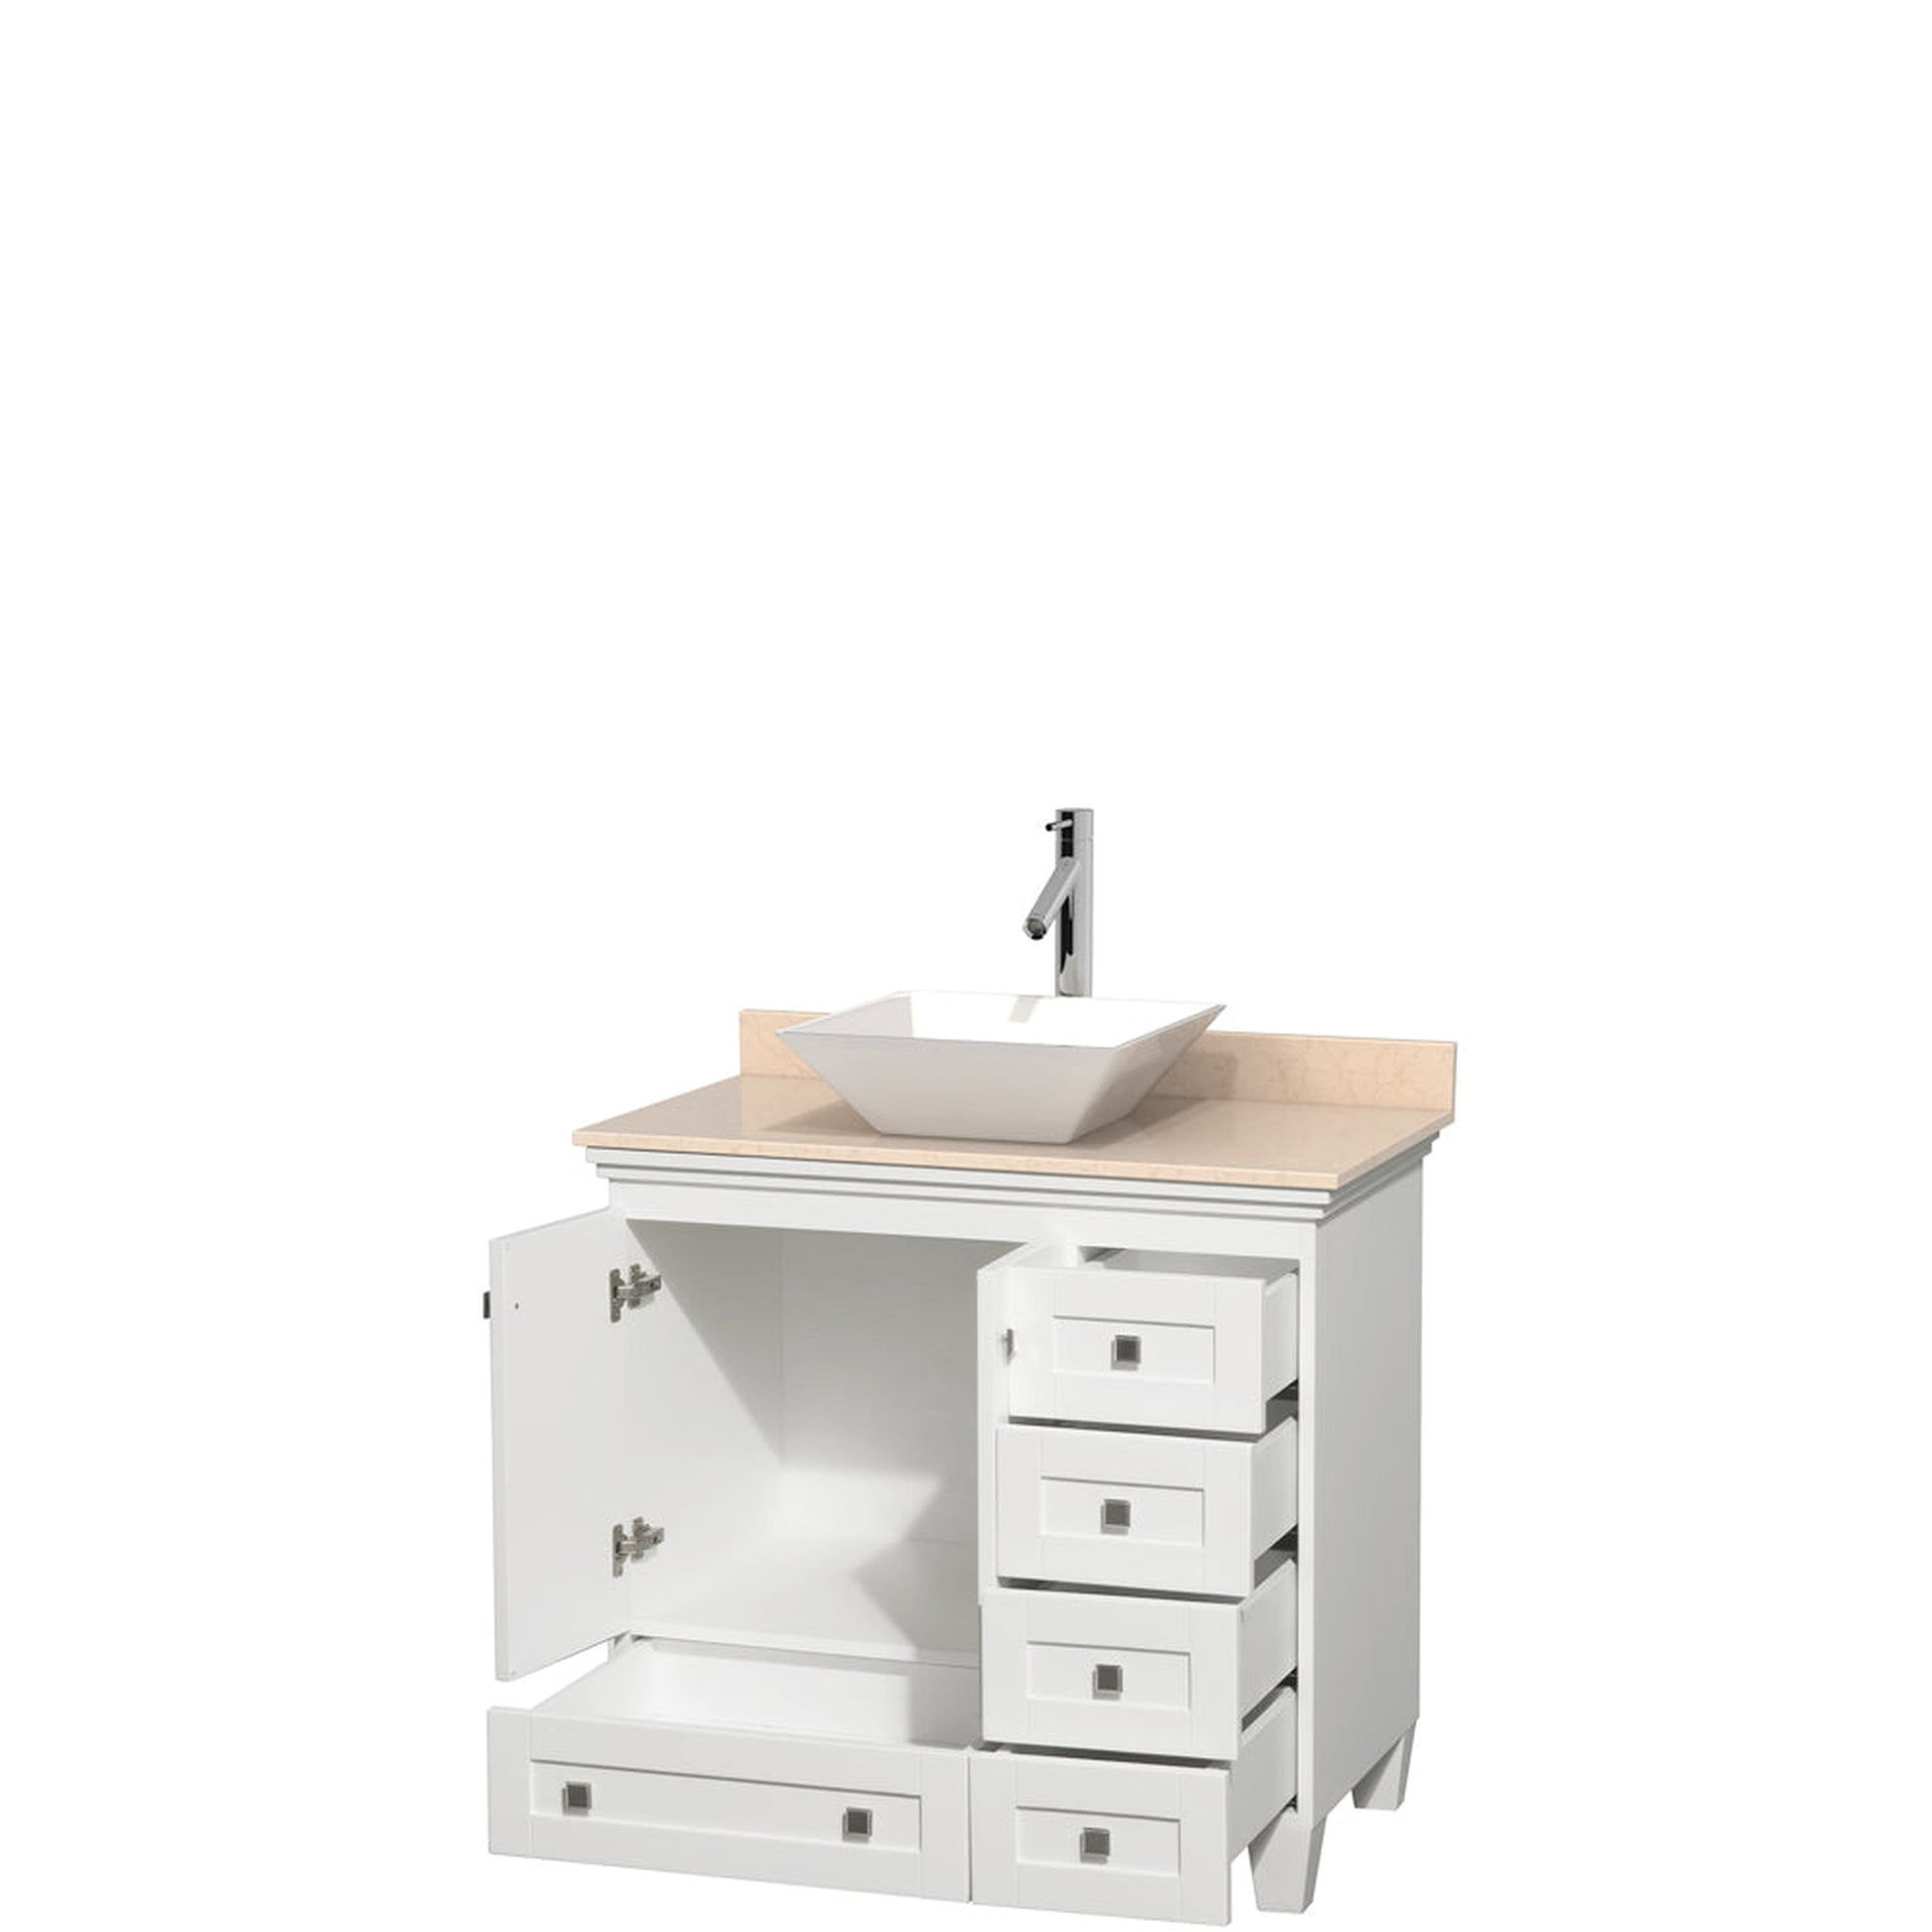 Wyndham Collection Acclaim 36" Single Bathroom Vanity in White With Ivory Marble Countertop & Pyra White Porcelain Sink